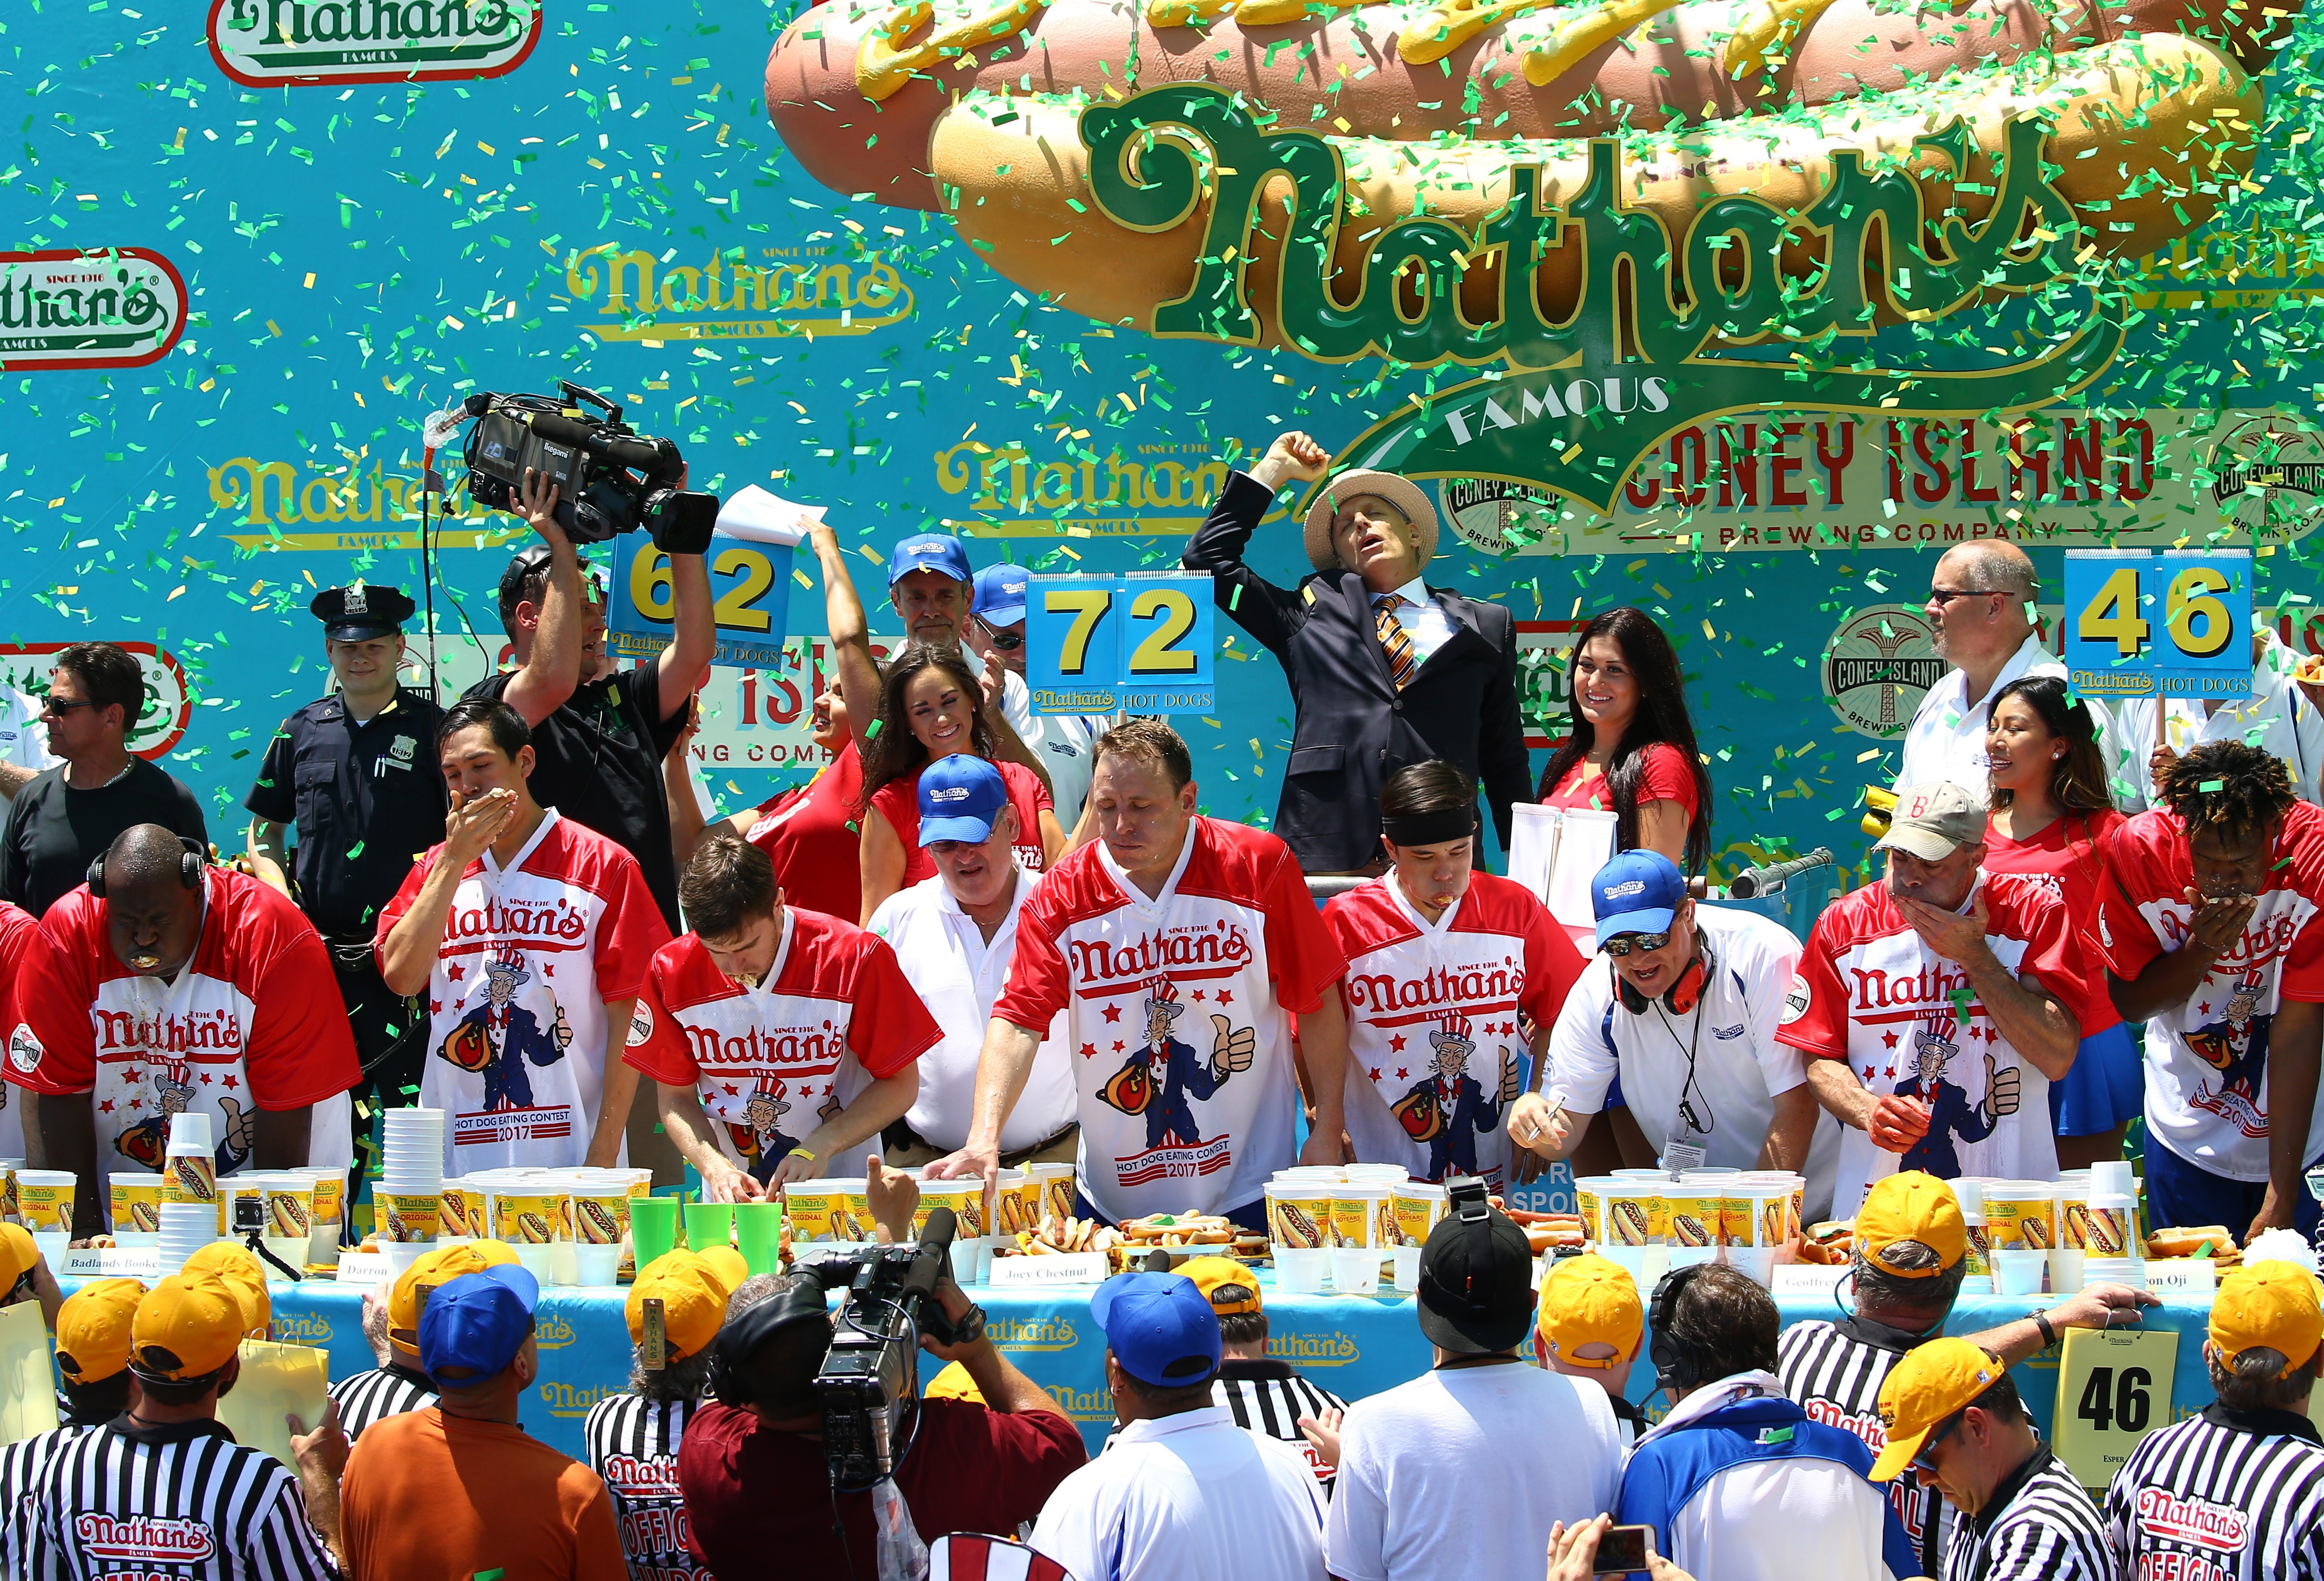 Joey Chestnut (center) wins the men's division of the 2017 Nathan's Famous International Hot Dog Eating Contest at Coney Island, eating 72 hot dogs. (Getty Images)